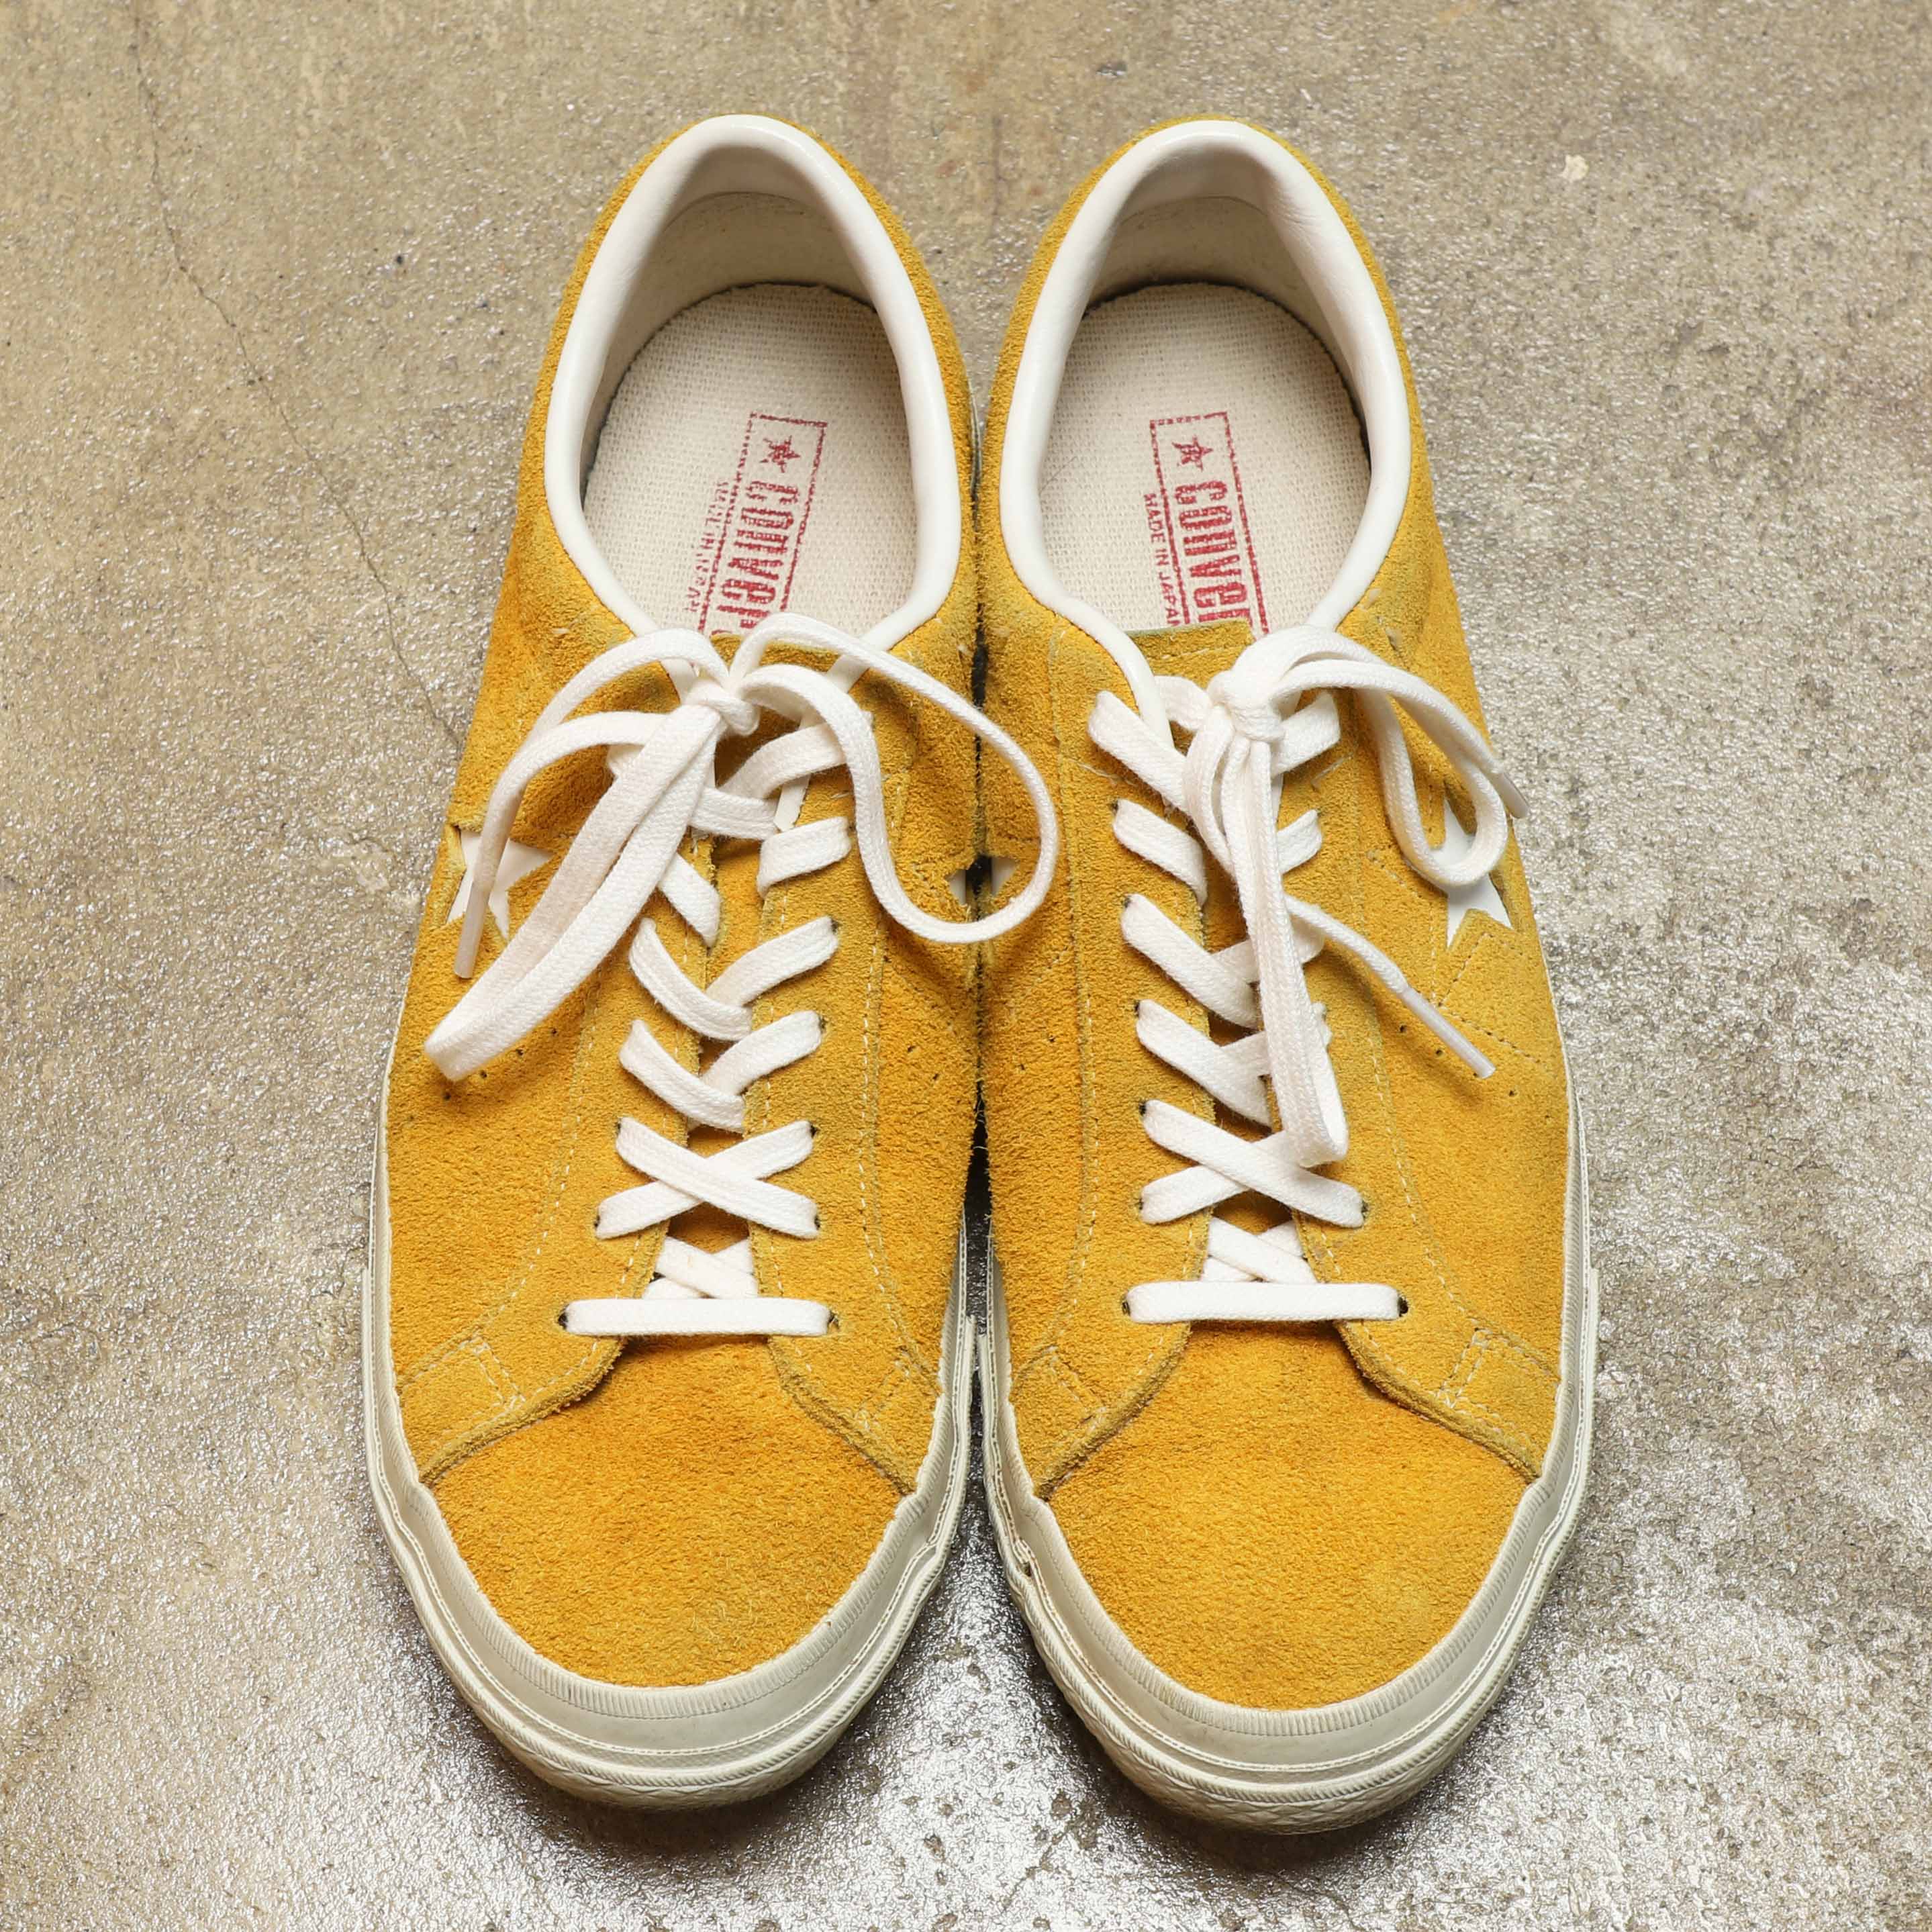 CONVERSE JAPAN ONE STAR SUEDE - YELLOW